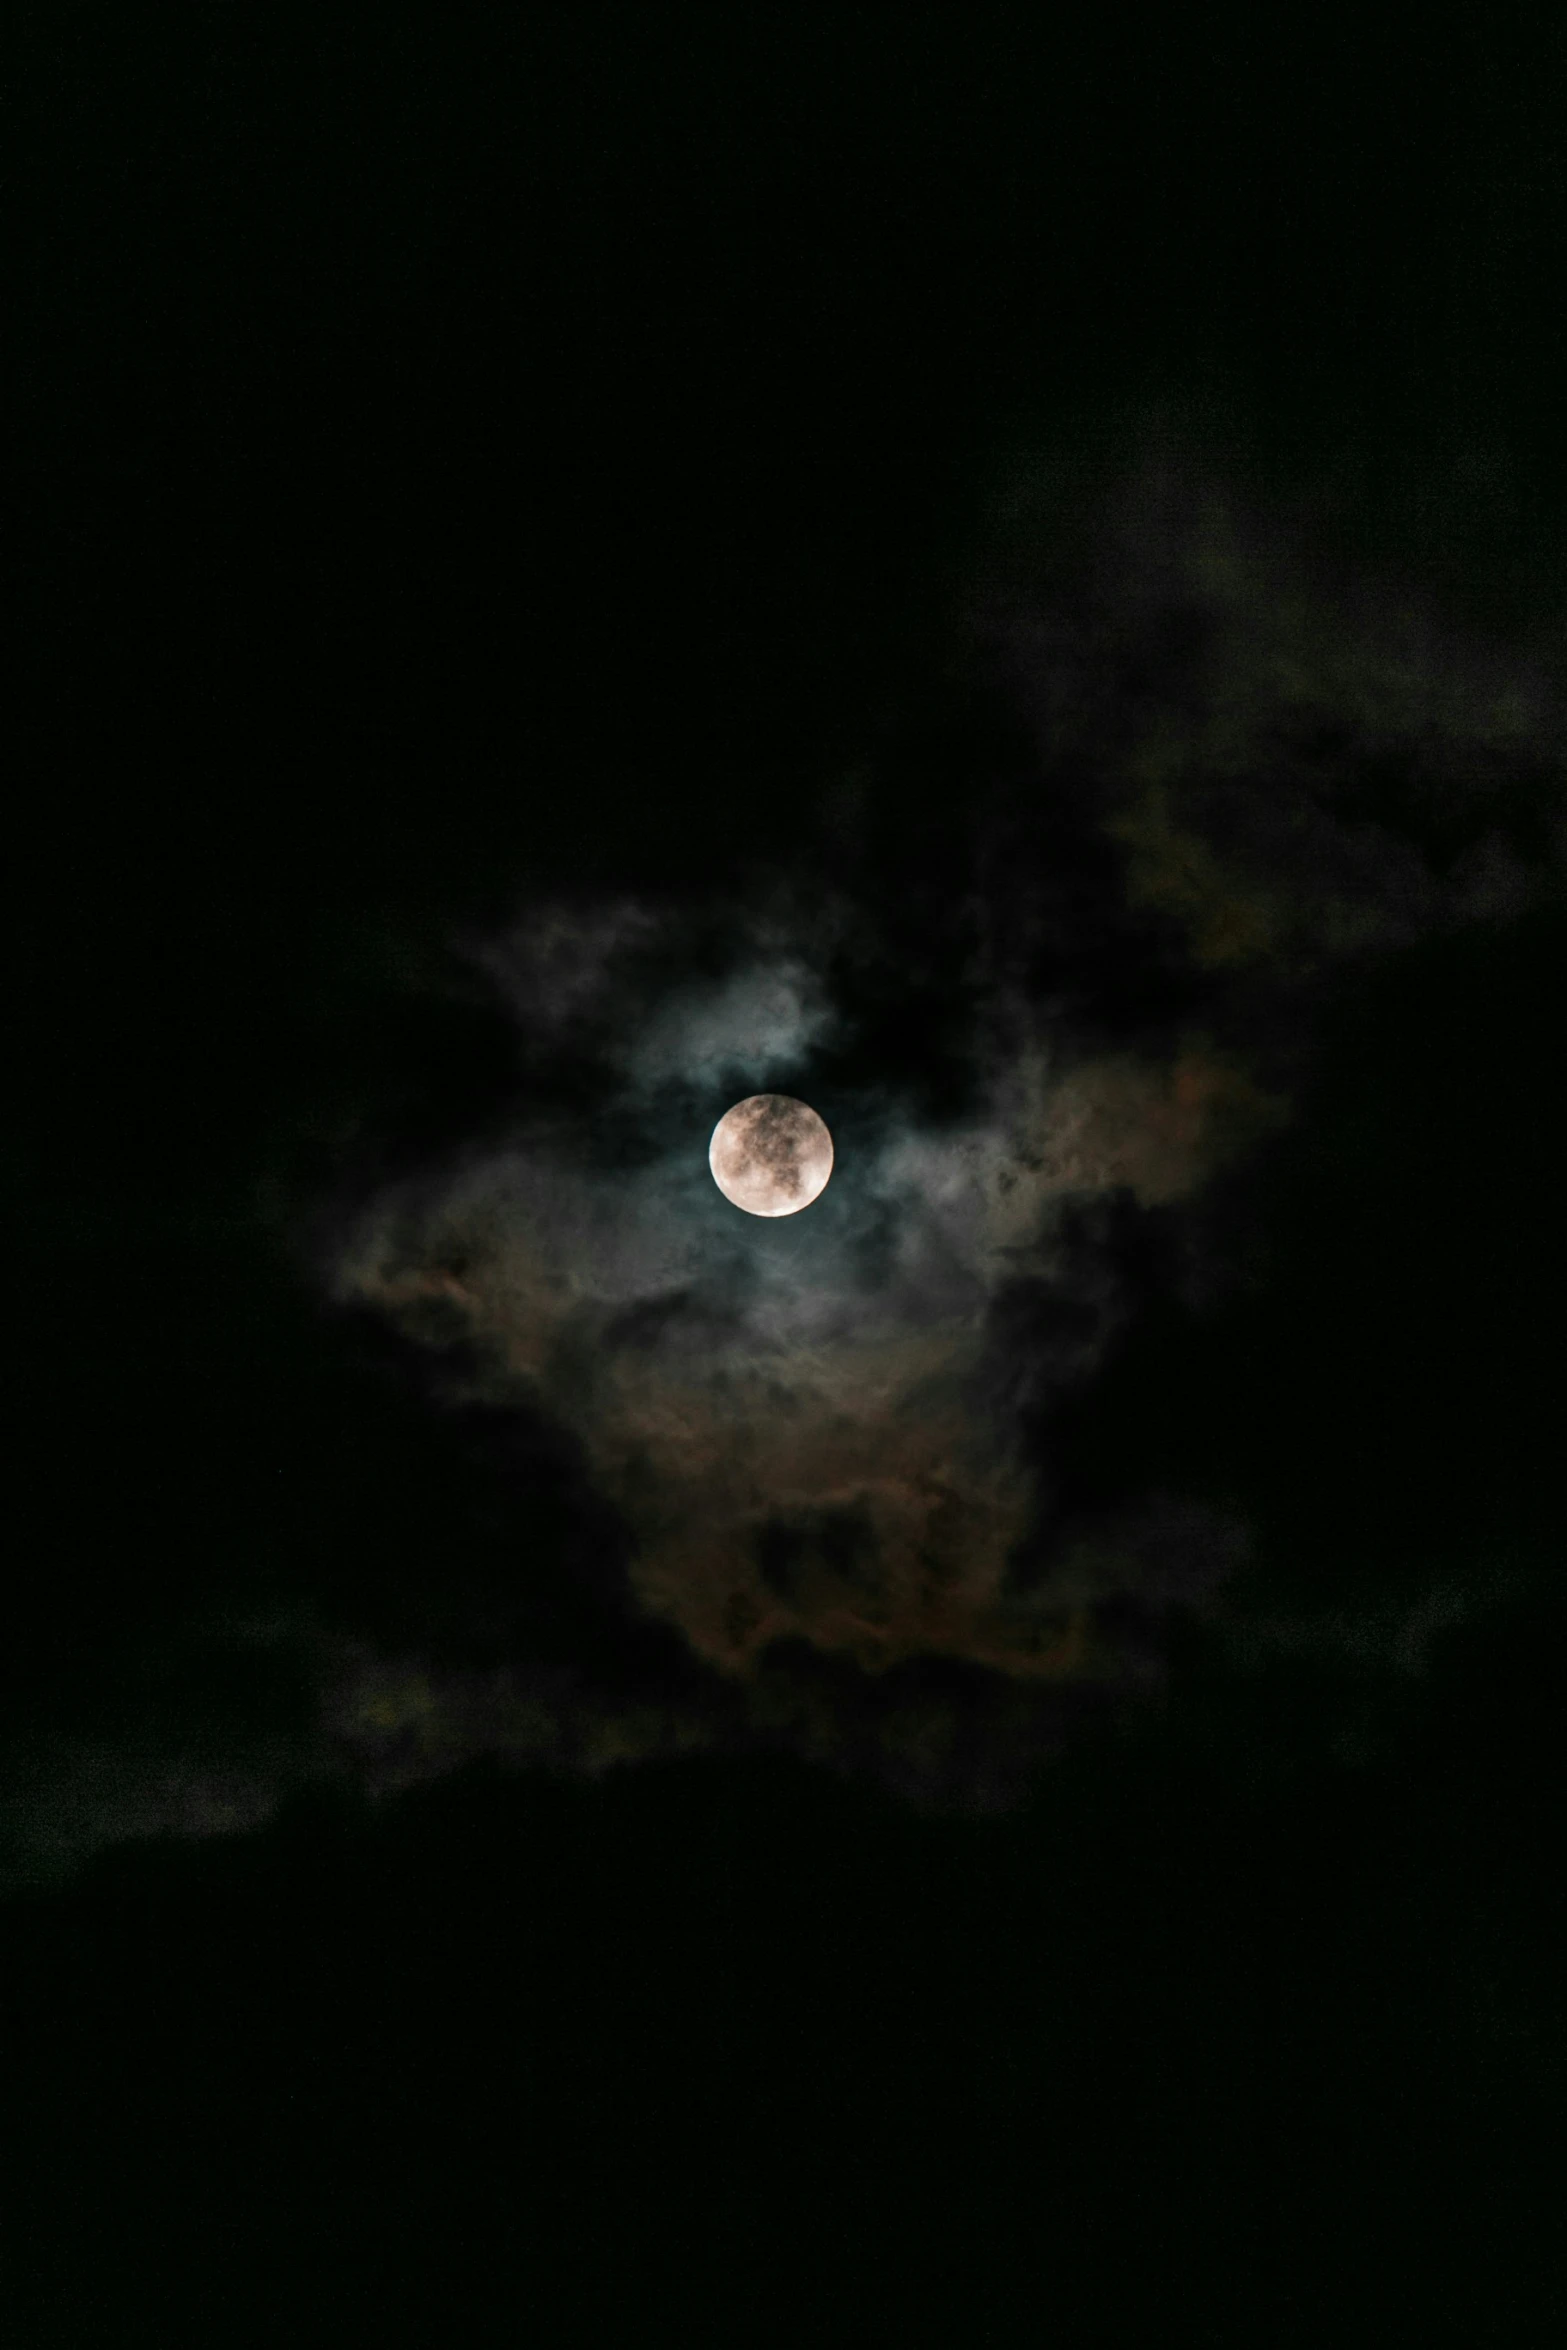 the full moon with clouds and some light reflecting off it